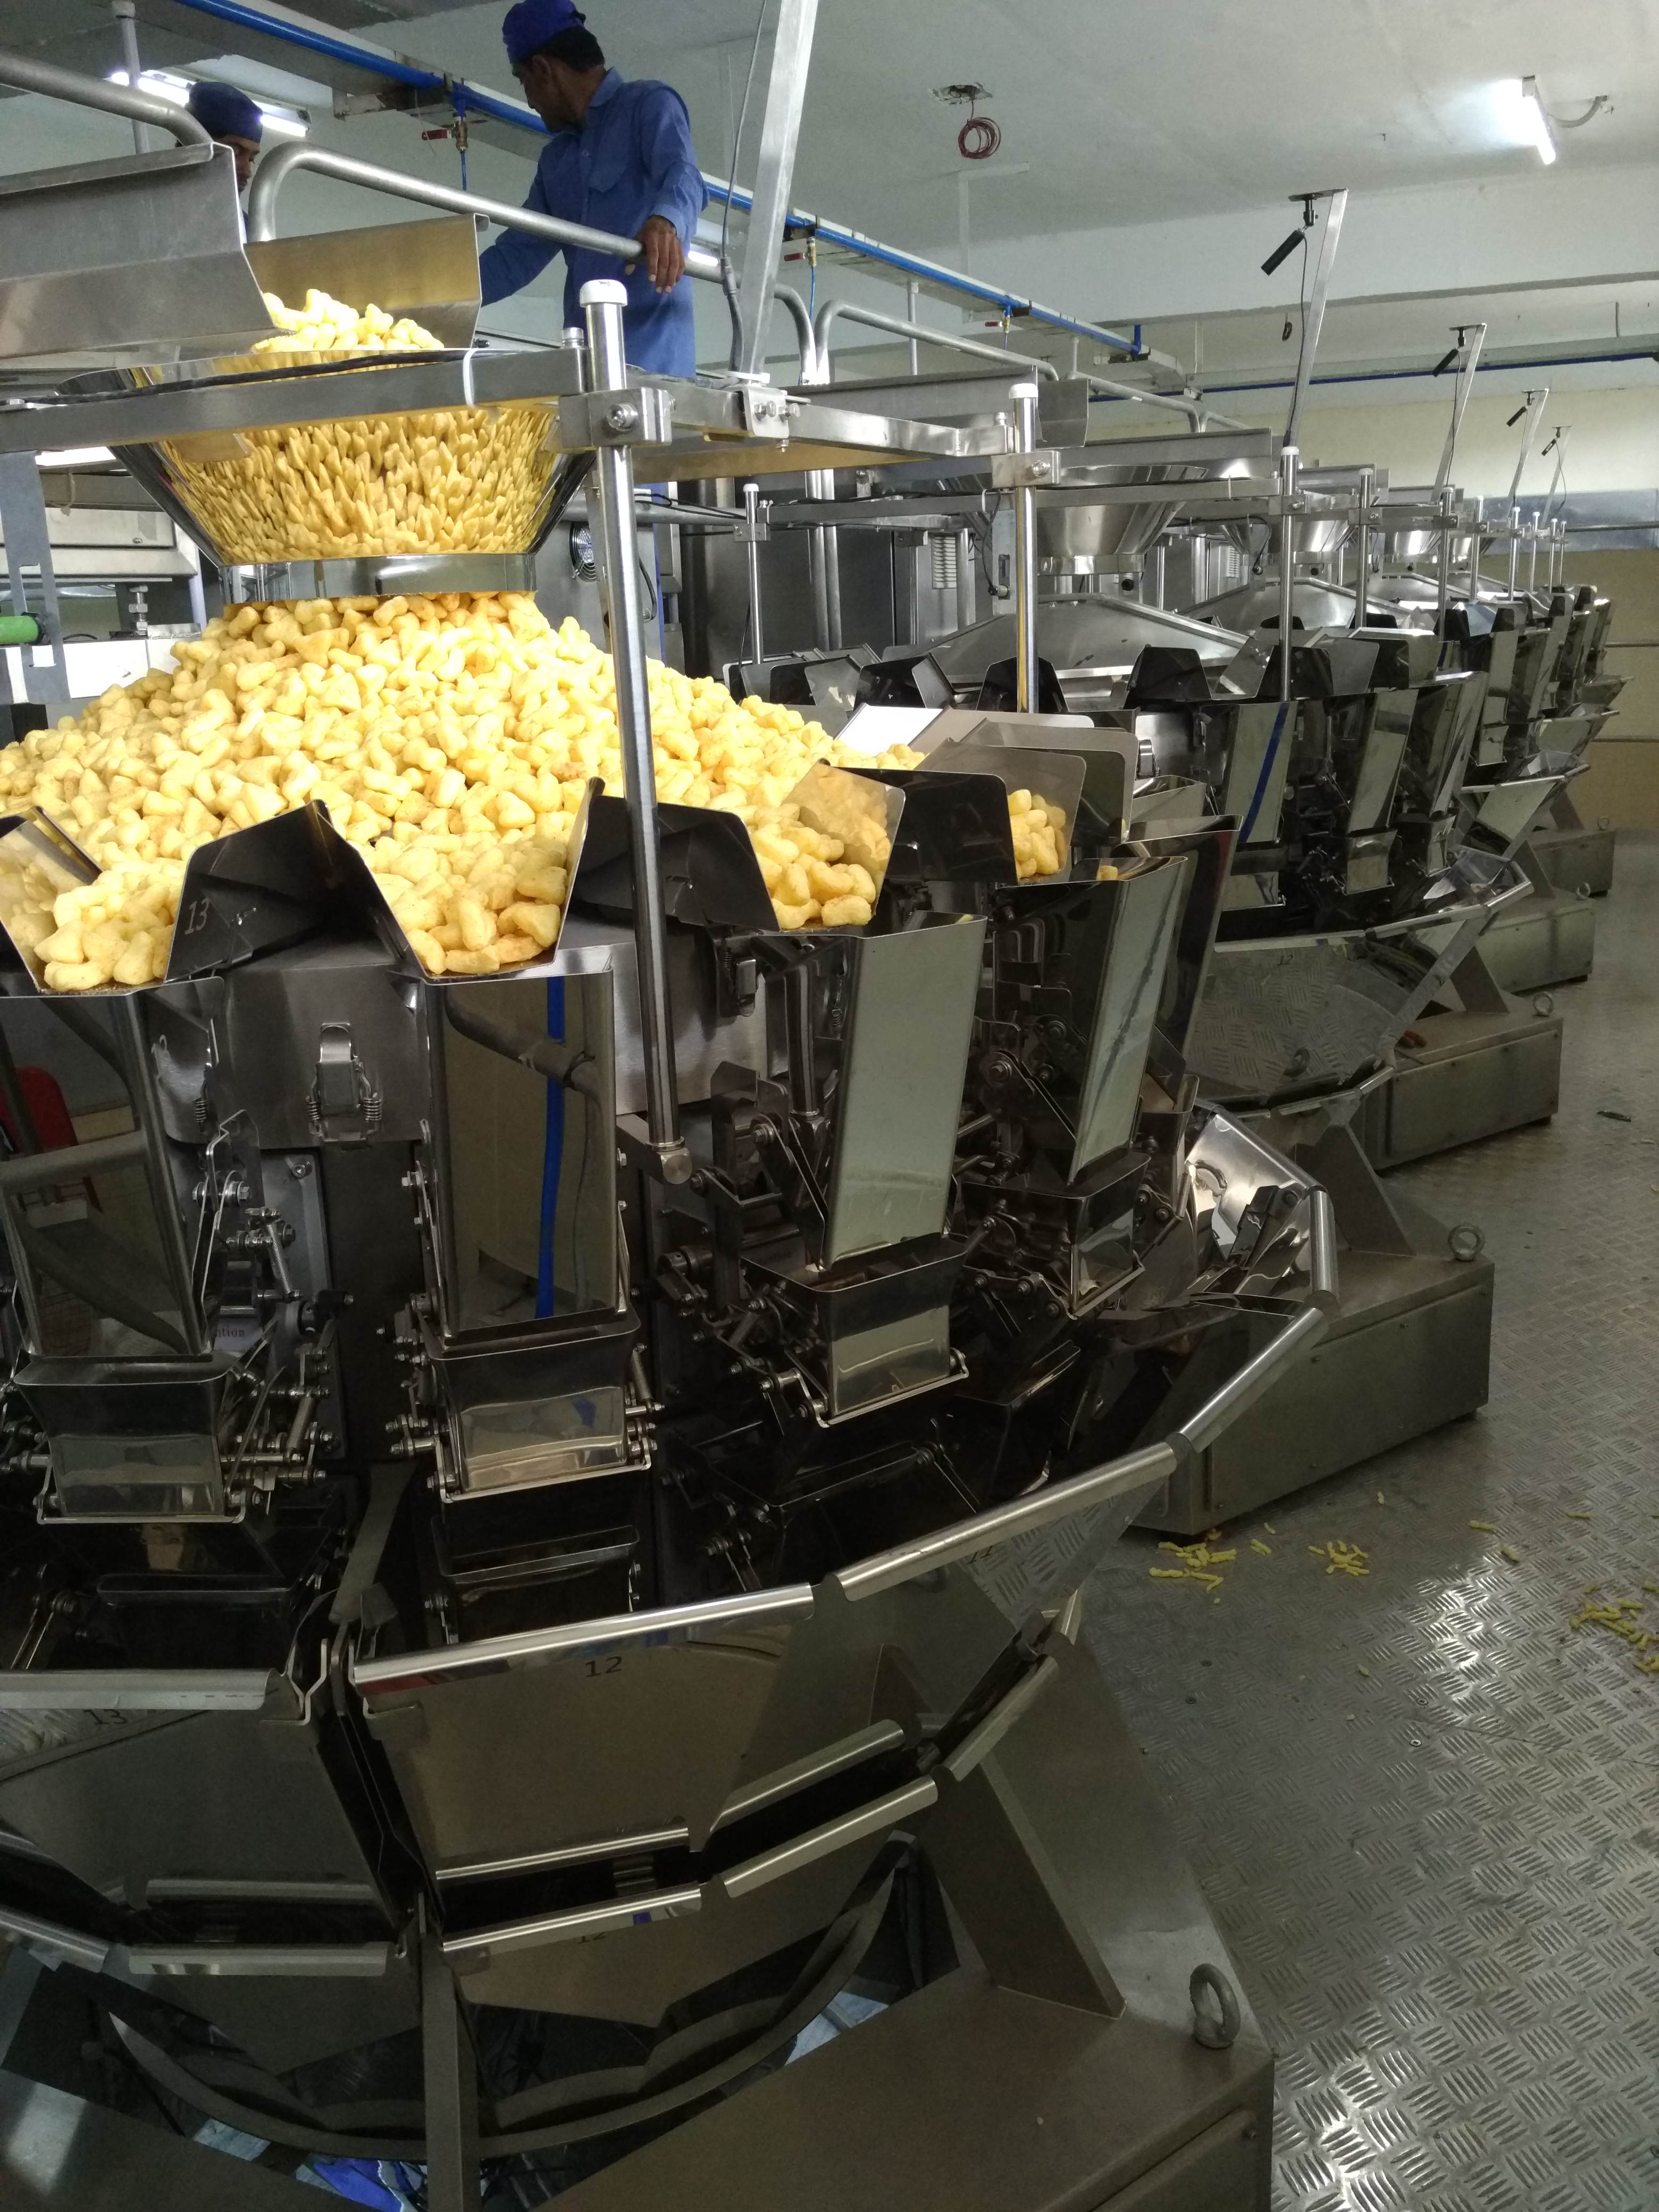 CWS Multihead Weighers To Suit All Applications